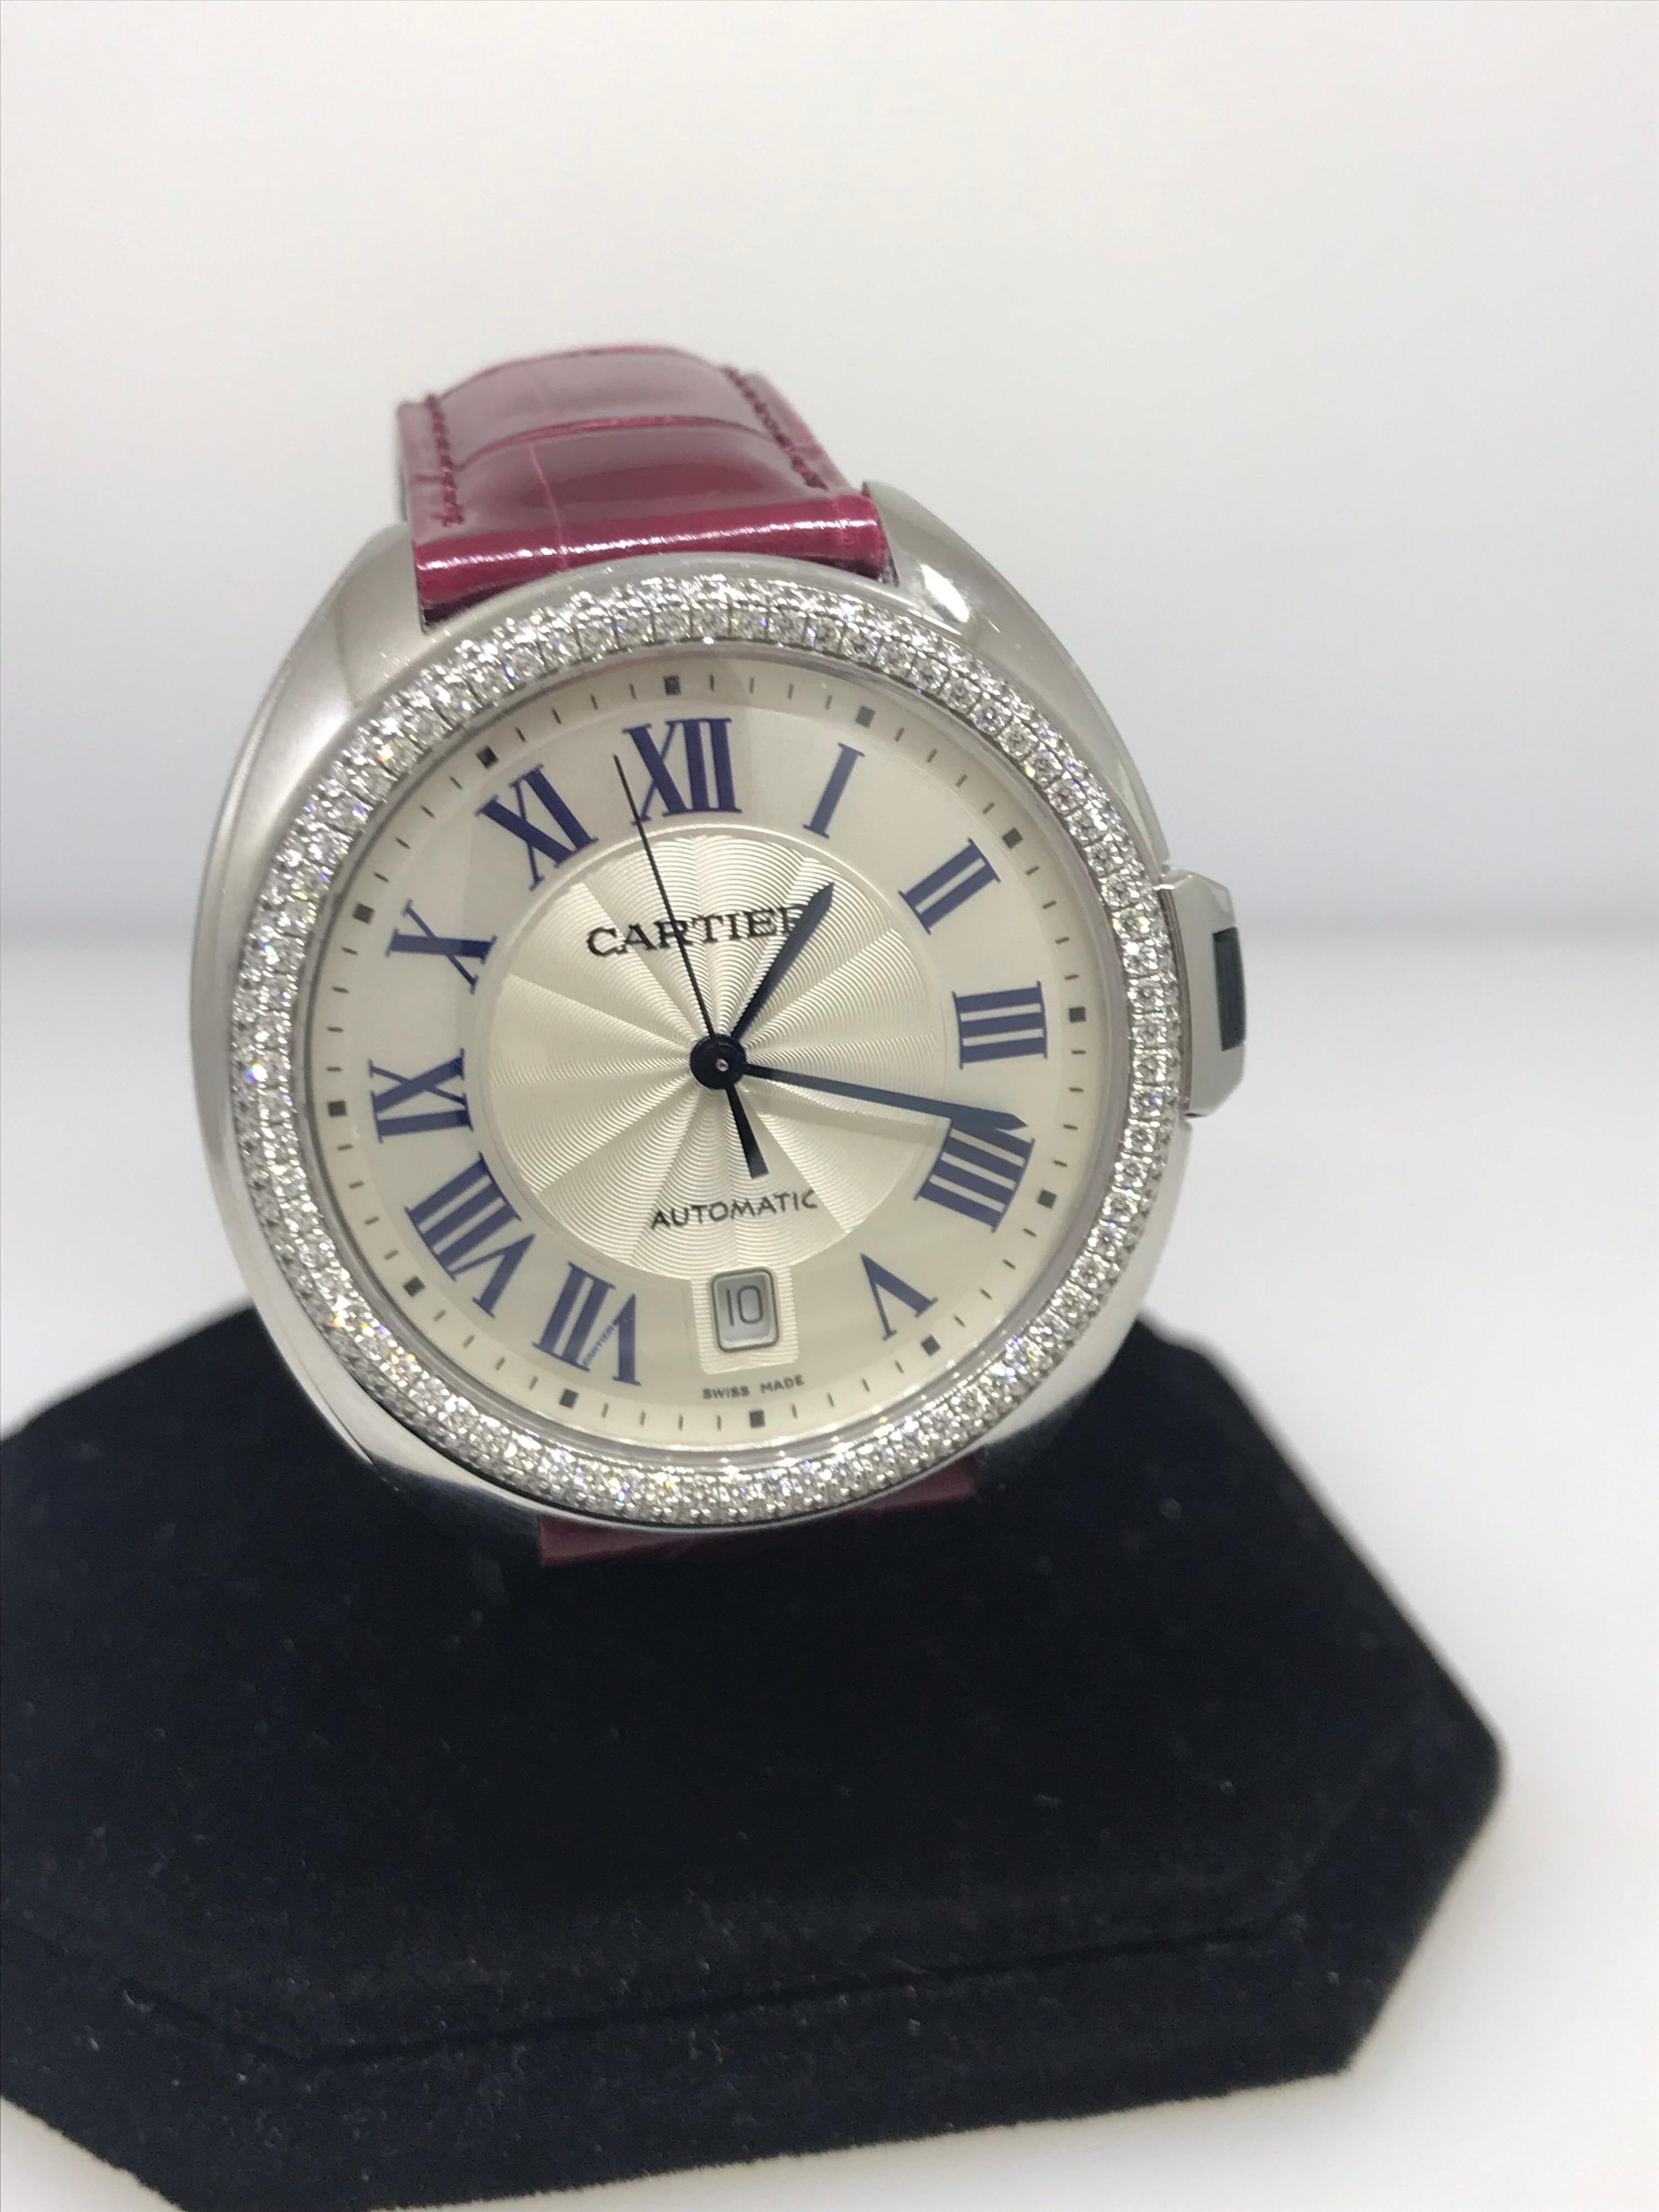 Cartier Cle Ladies Watch

Model Number: WJCL0011

100% Authentic

Brand New

Comes with original Cartier Box and Papers

18 Karat White Gold Case & Buckle

Two Row Diamond Bezel

Silver Dial

Case Diameter: 40mm

Swiss made Automatic